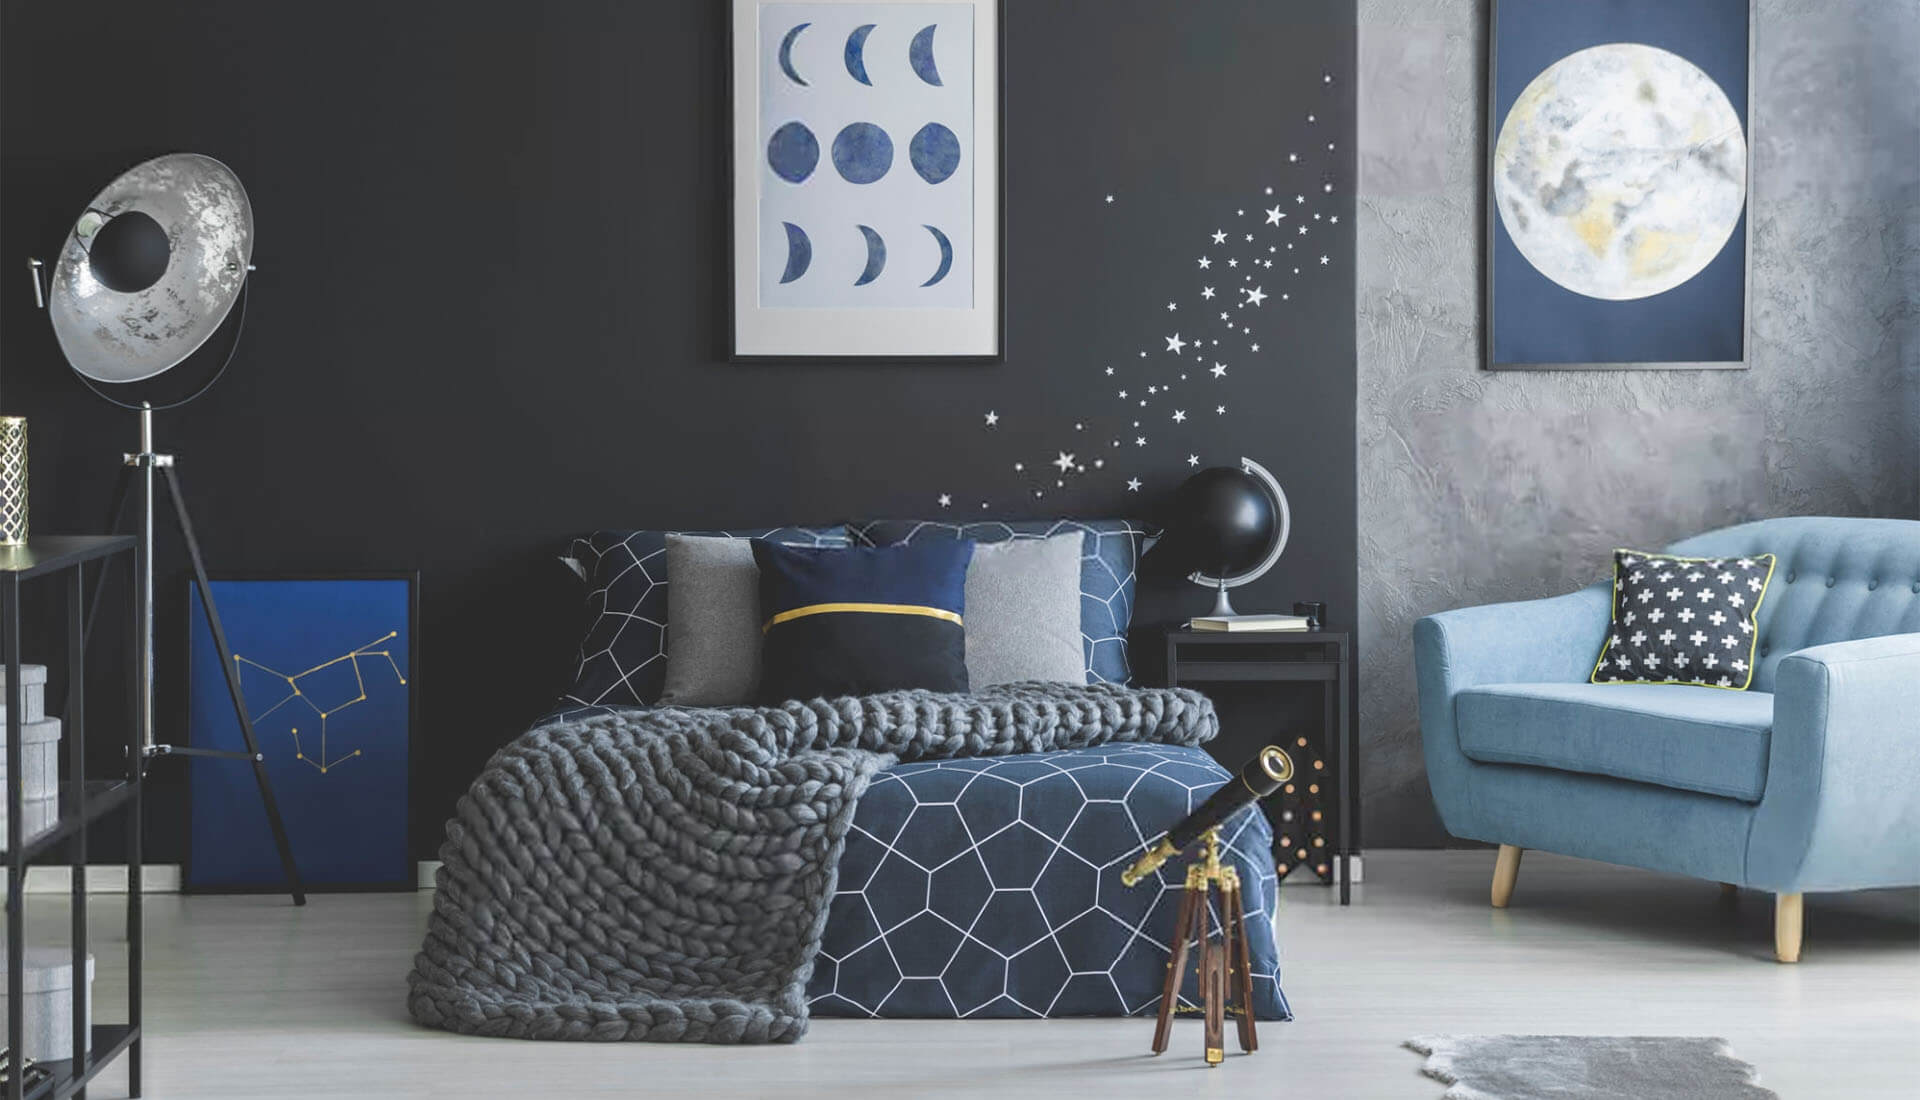 Starry sky on the wall as a deco sticker in bedroom